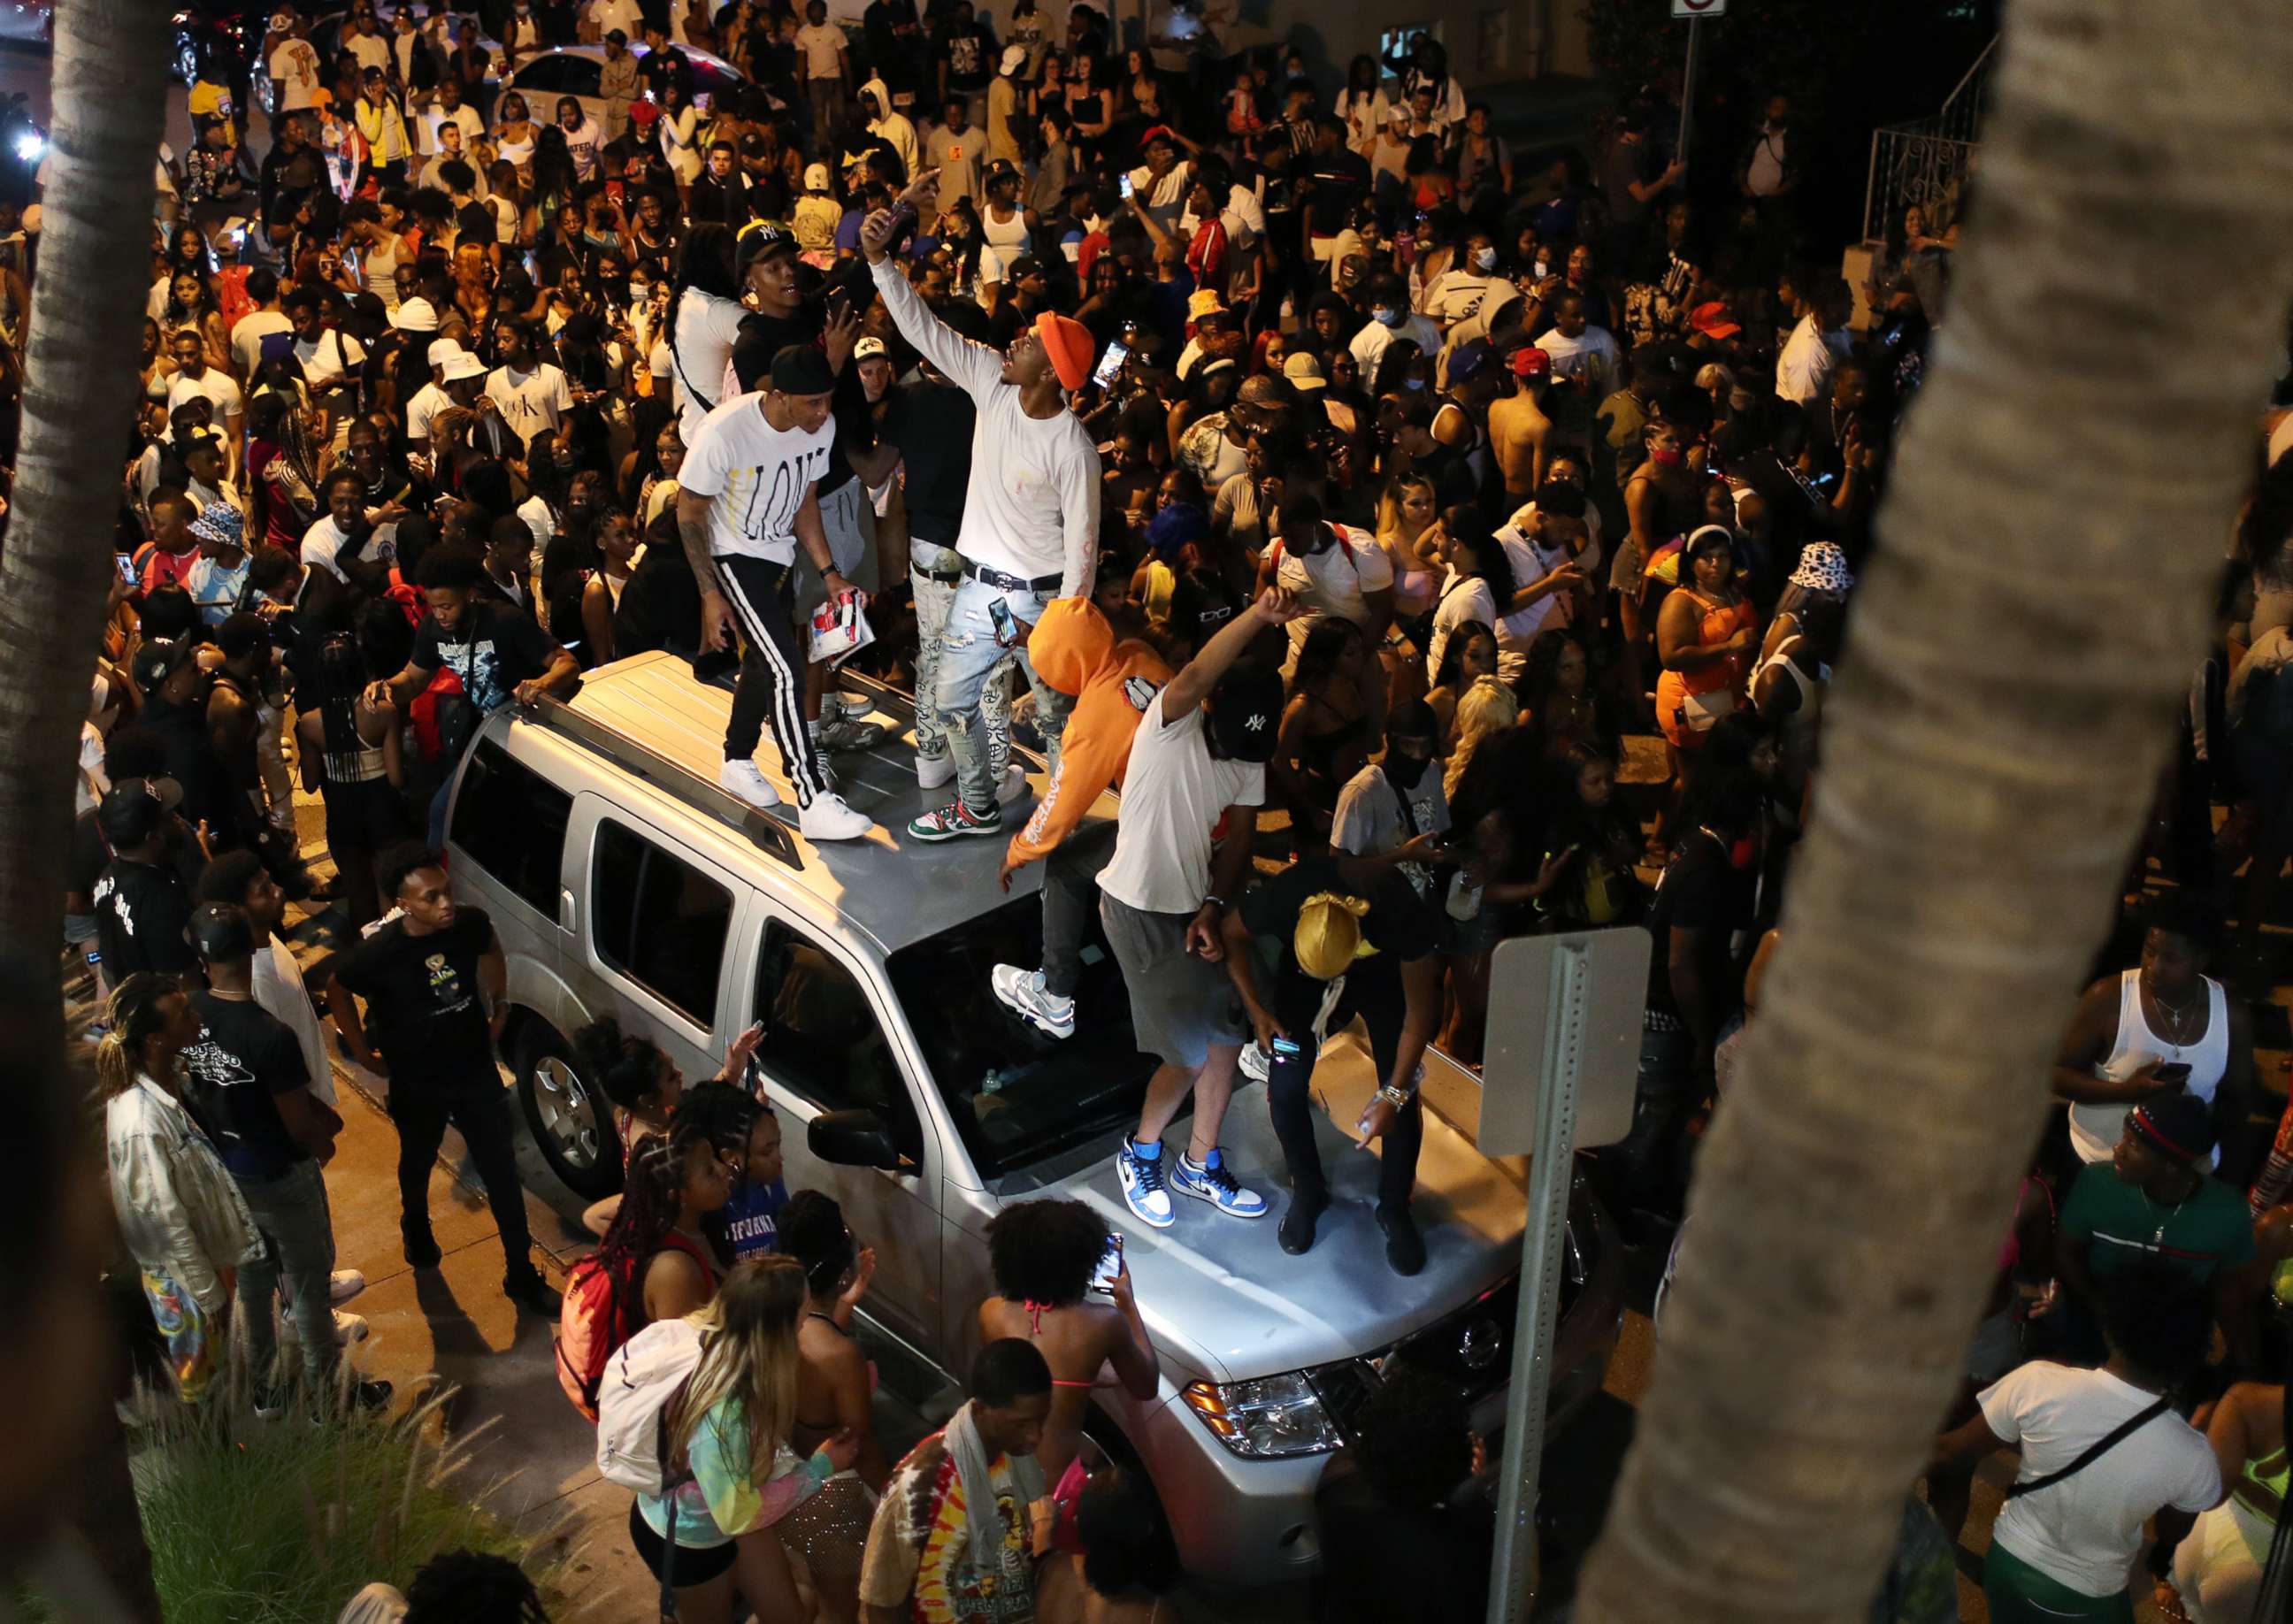 PHOTO: A crowd gathers while exiting the area as an 8pm curfew goes into effect, March 21, 2021, in Miami Beach, Fla.